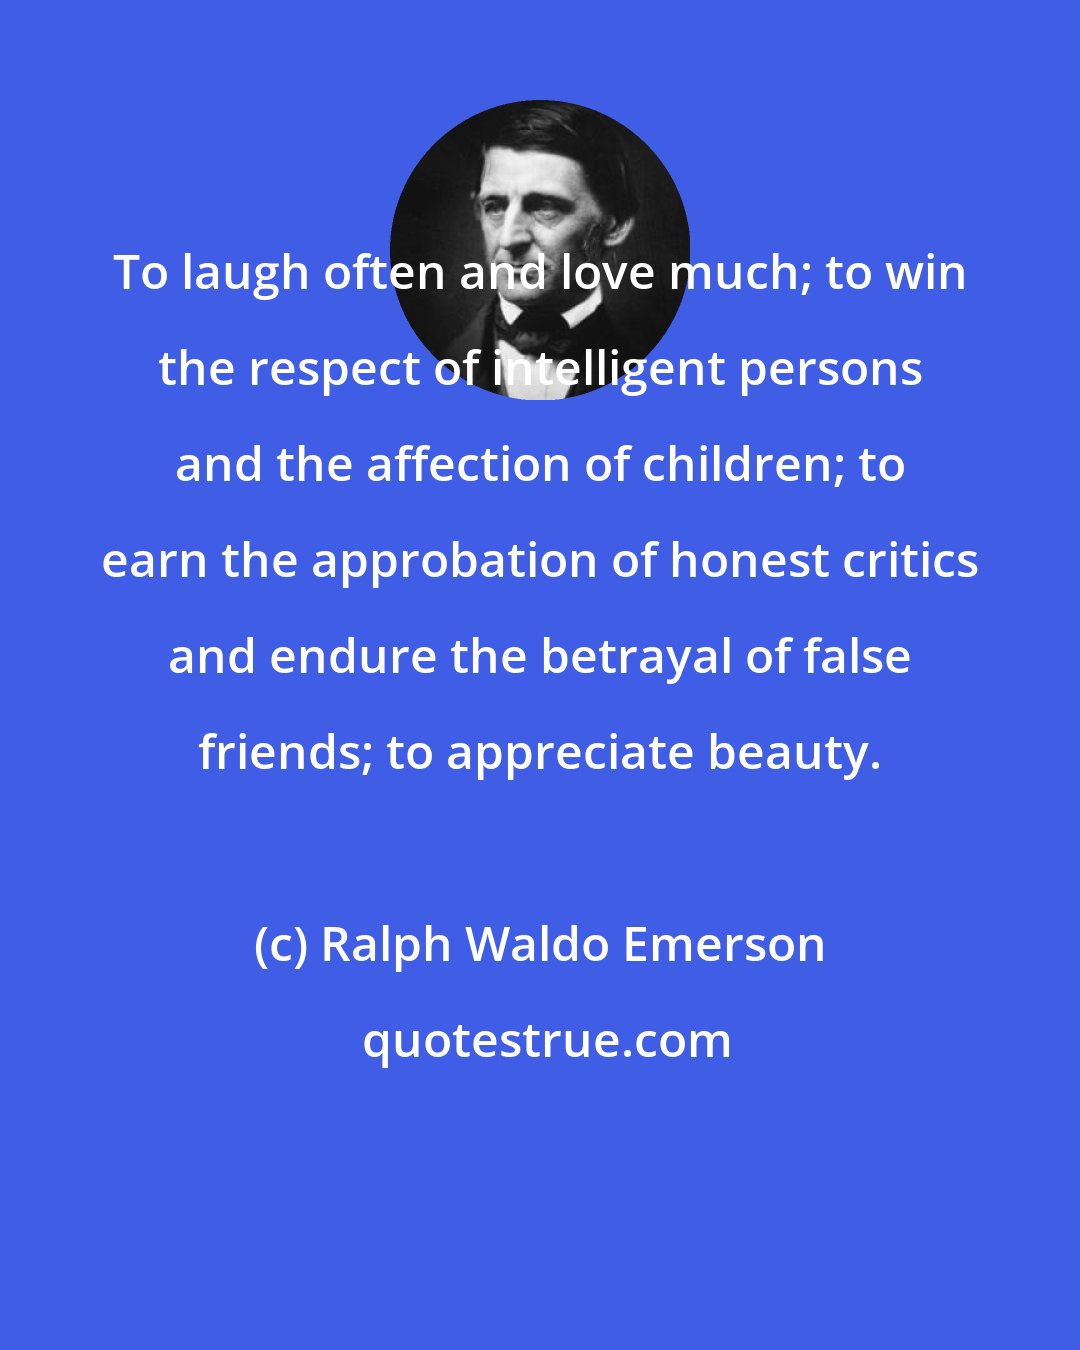 Ralph Waldo Emerson: To laugh often and love much; to win the respect of intelligent persons and the affection of children; to earn the approbation of honest critics and endure the betrayal of false friends; to appreciate beauty.